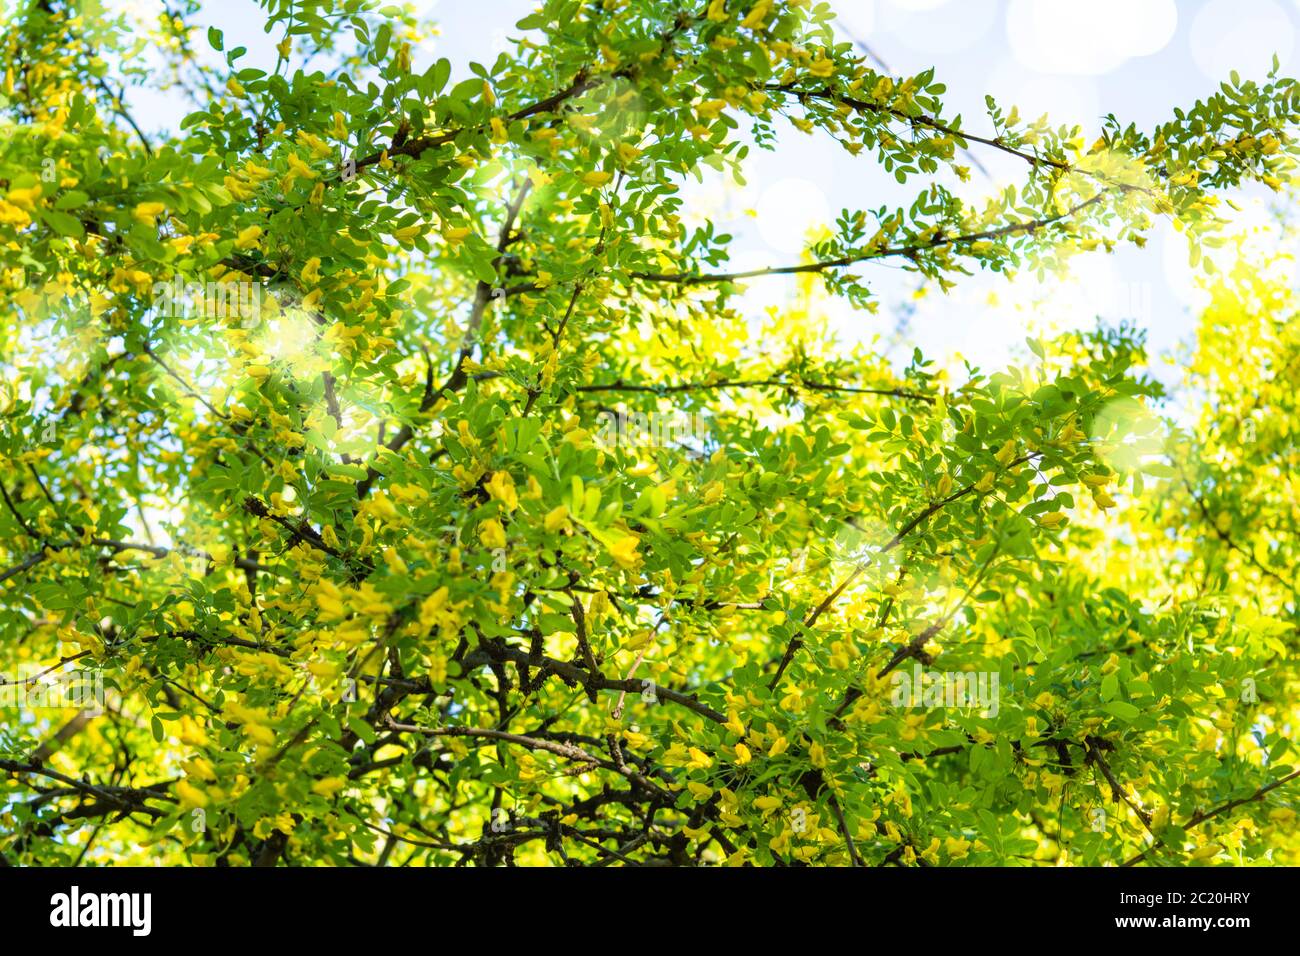 Flowers of yellow acacia shrub on shallow depth background. Close-up blooming Caragan arborescenes tree Stock Photo